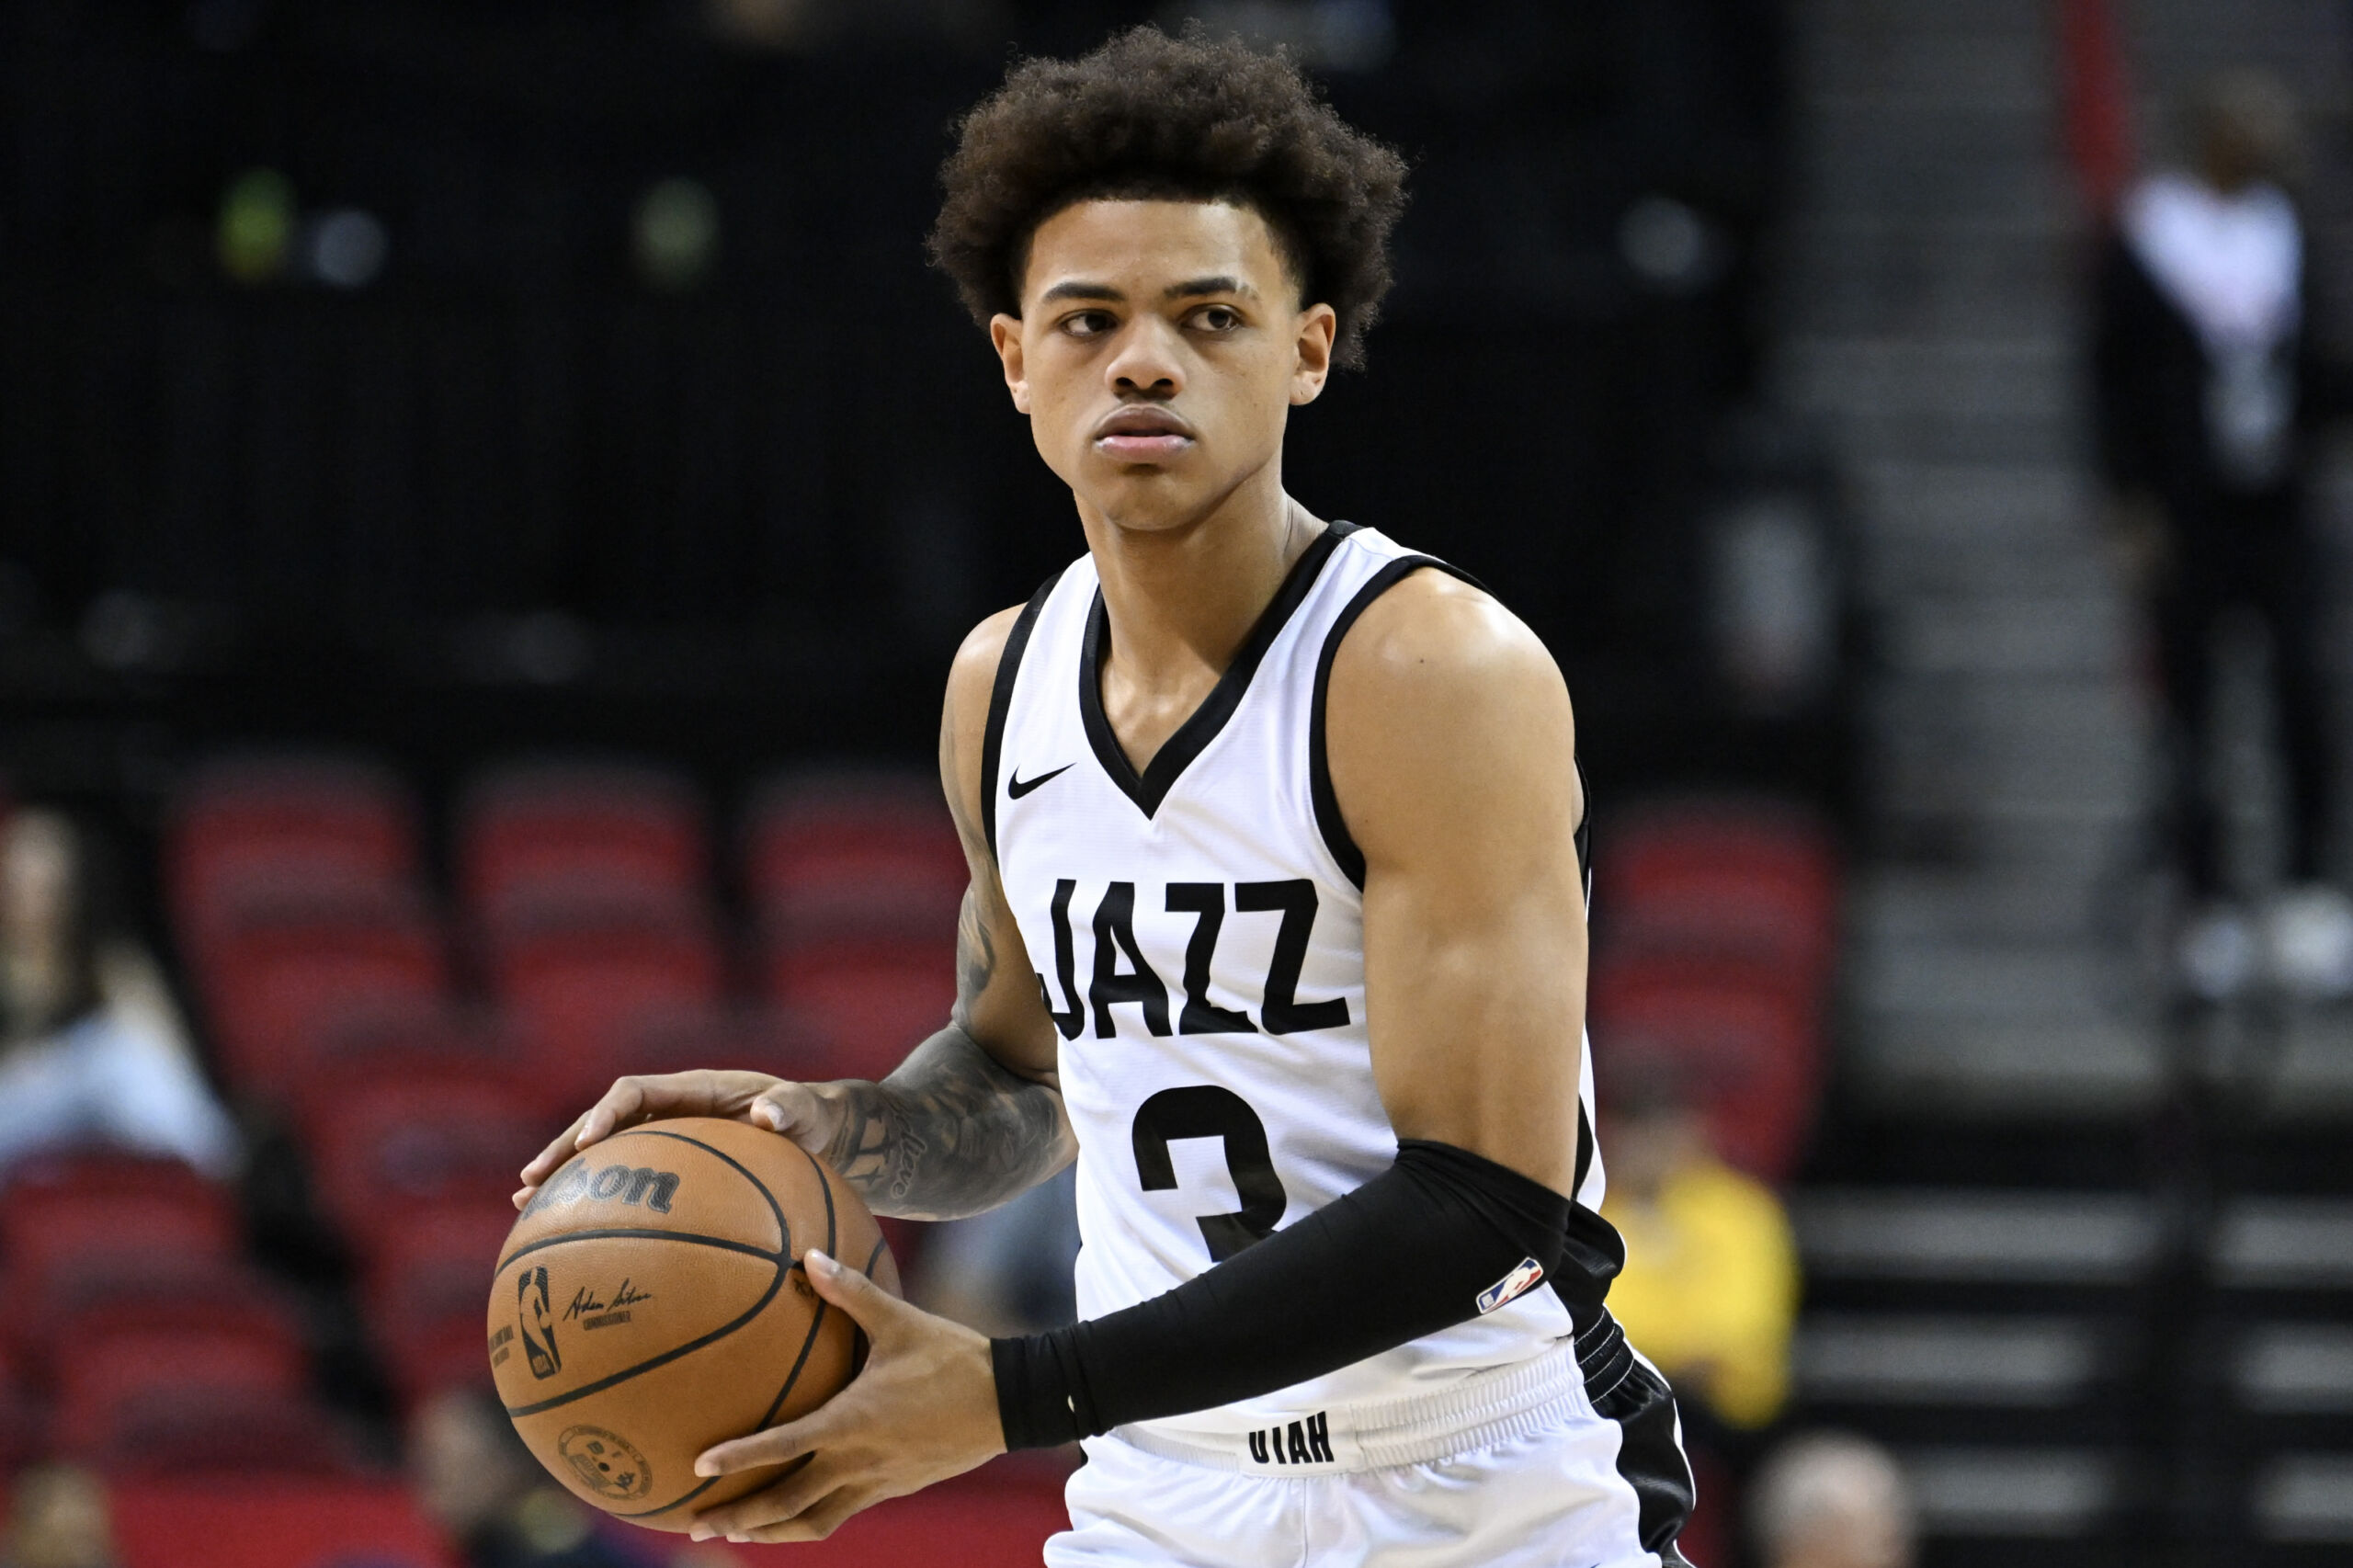 George shines for Jazz in NBA Debut